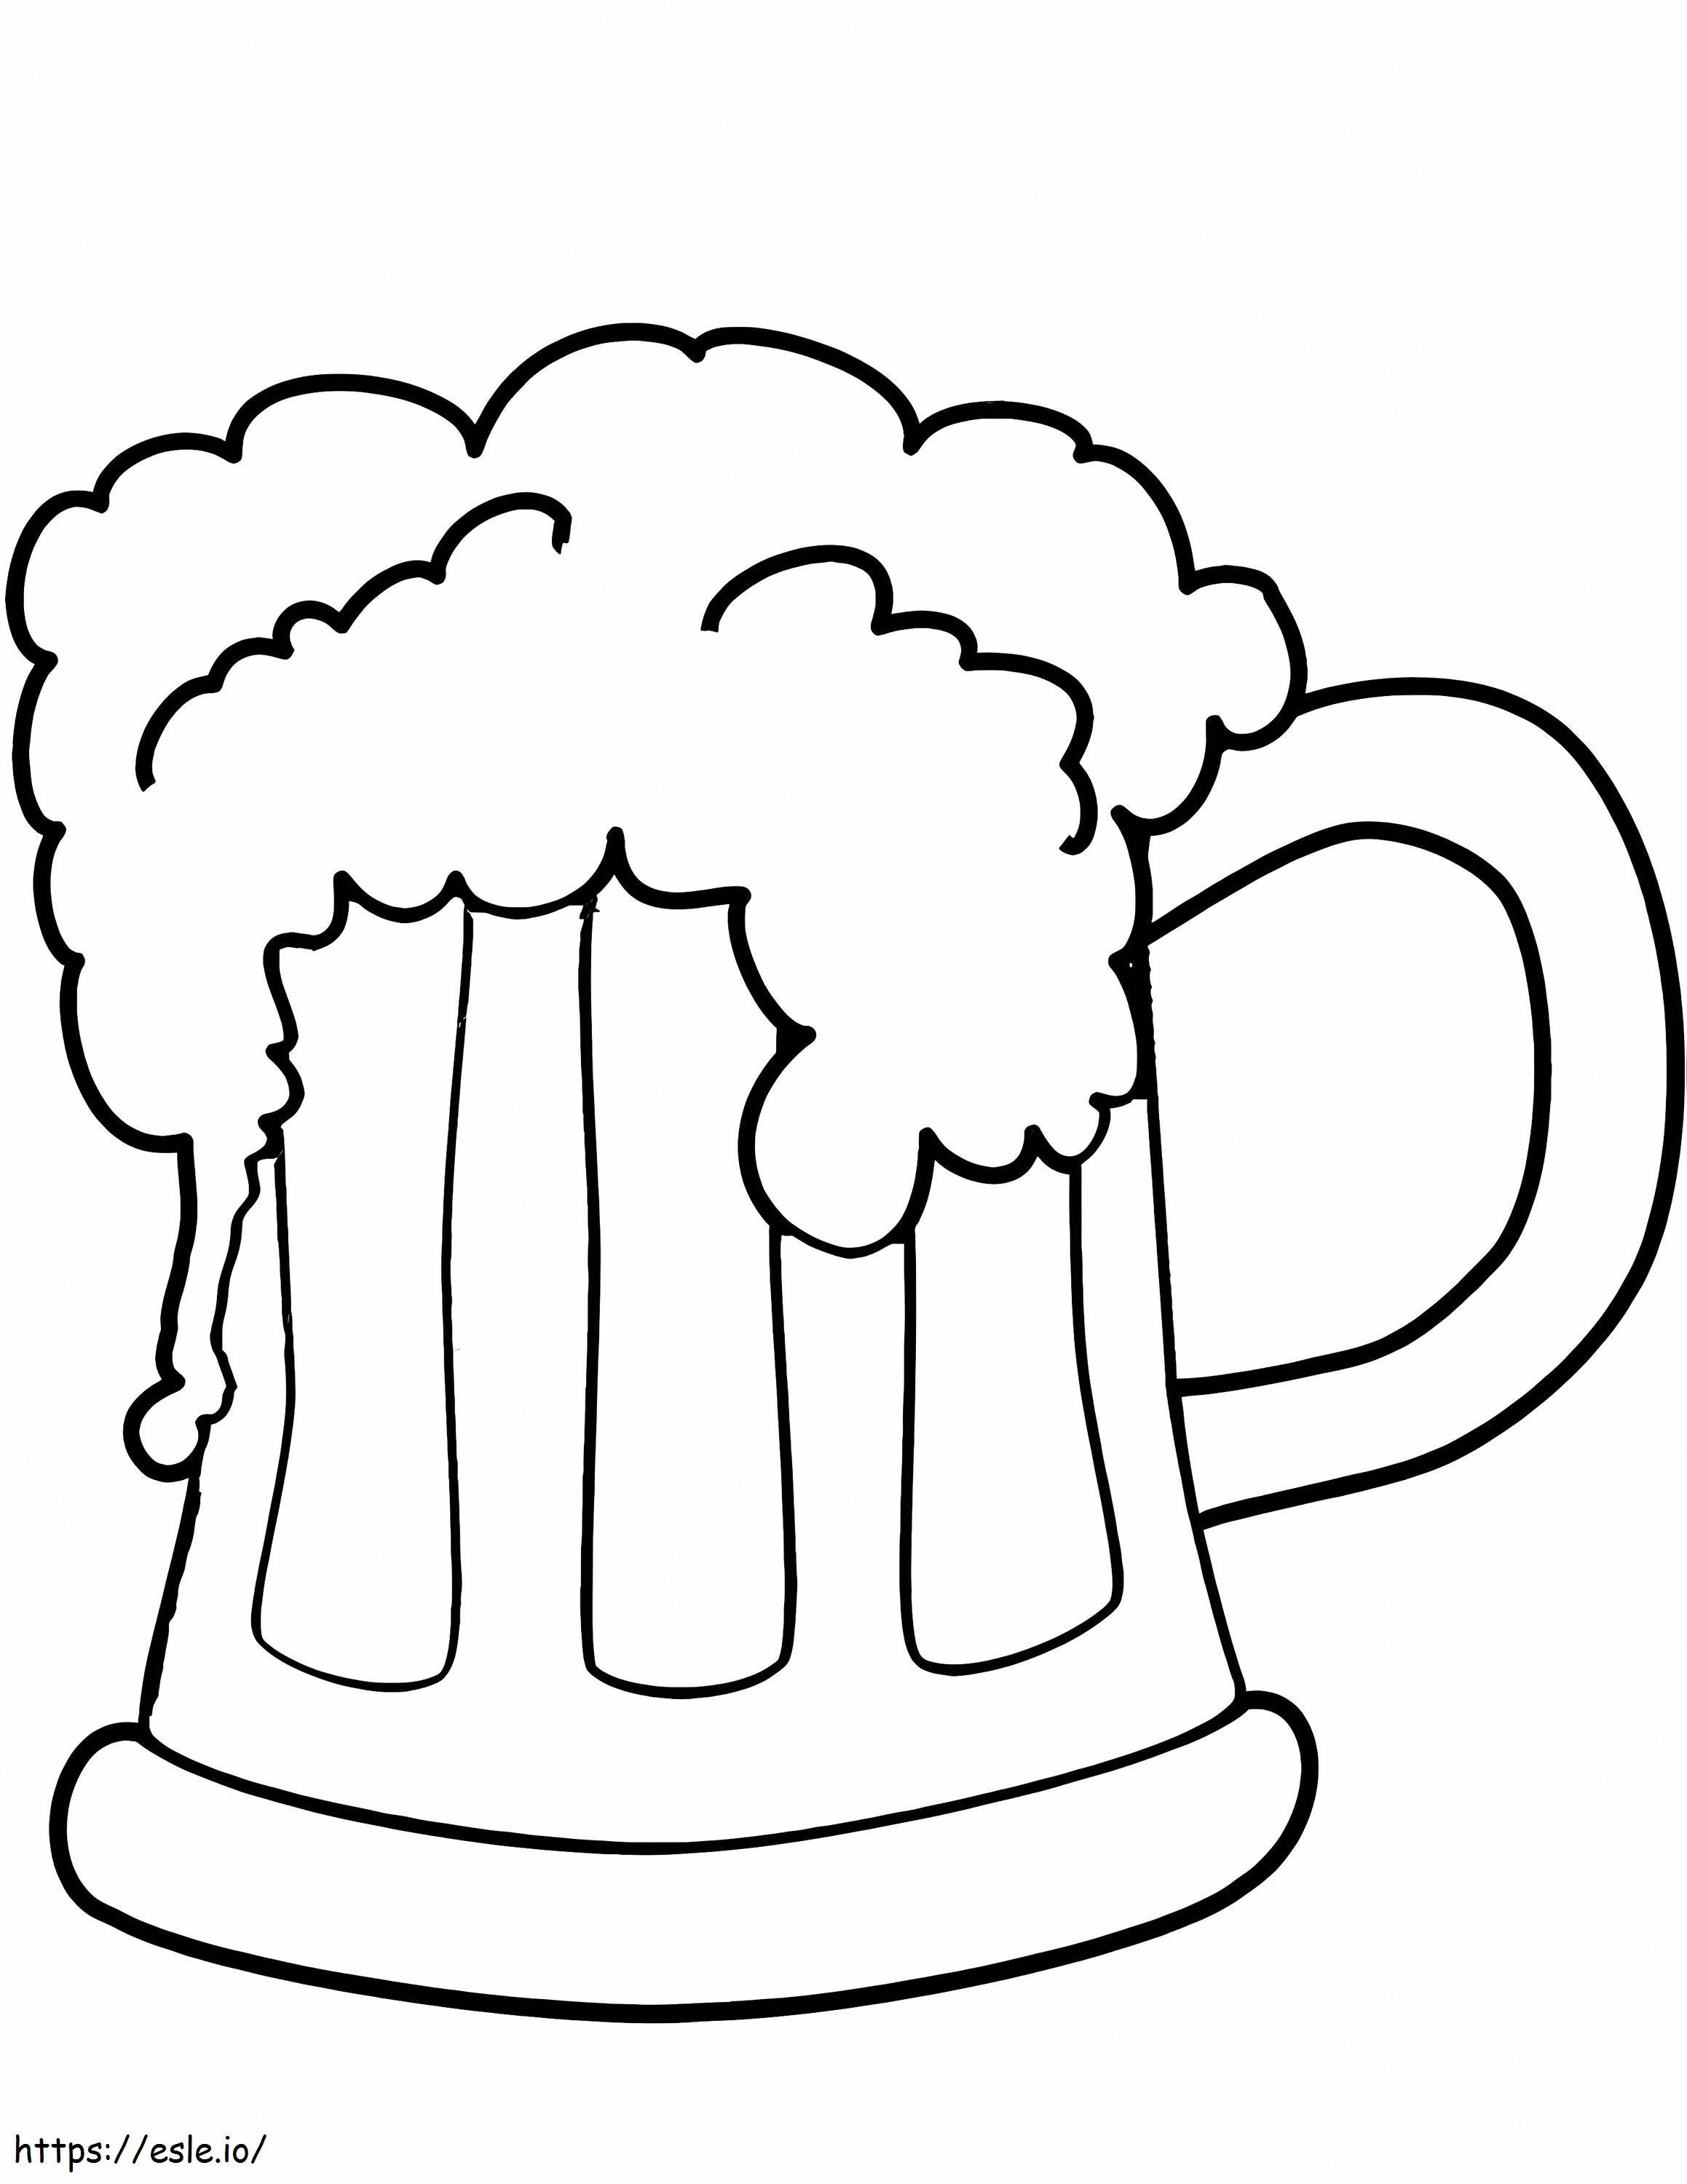 St. Patricks Day Beer coloring page